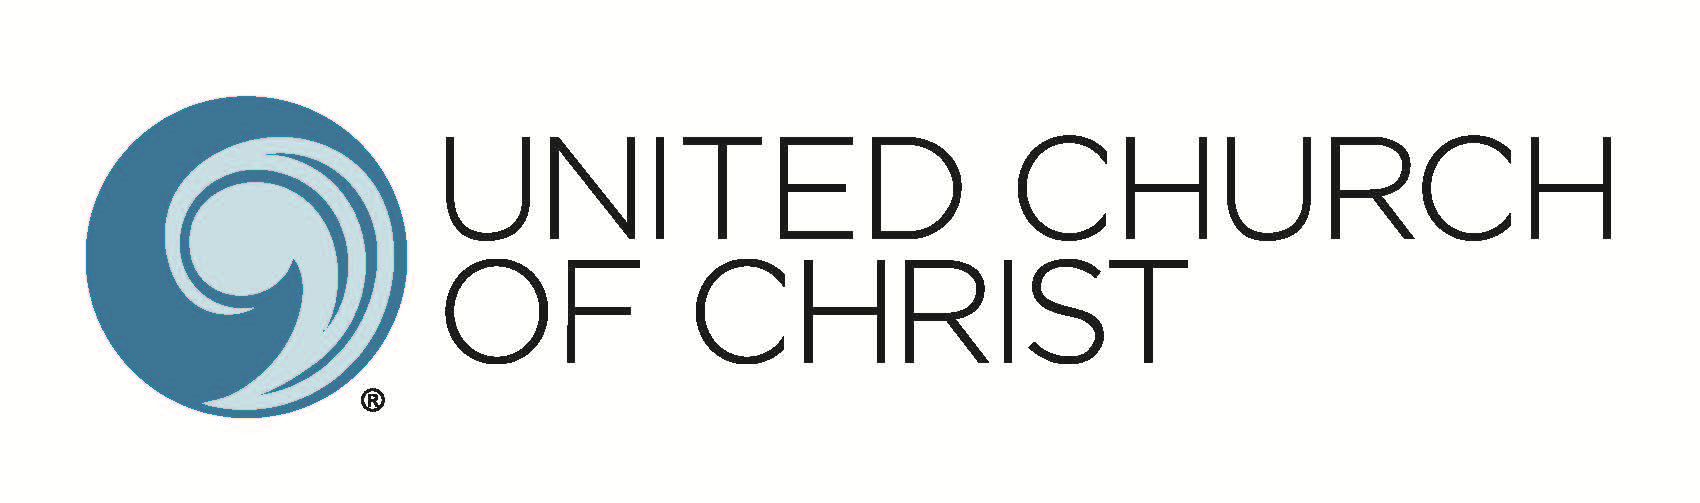 United Church of Christ, National Ministries Company Logo